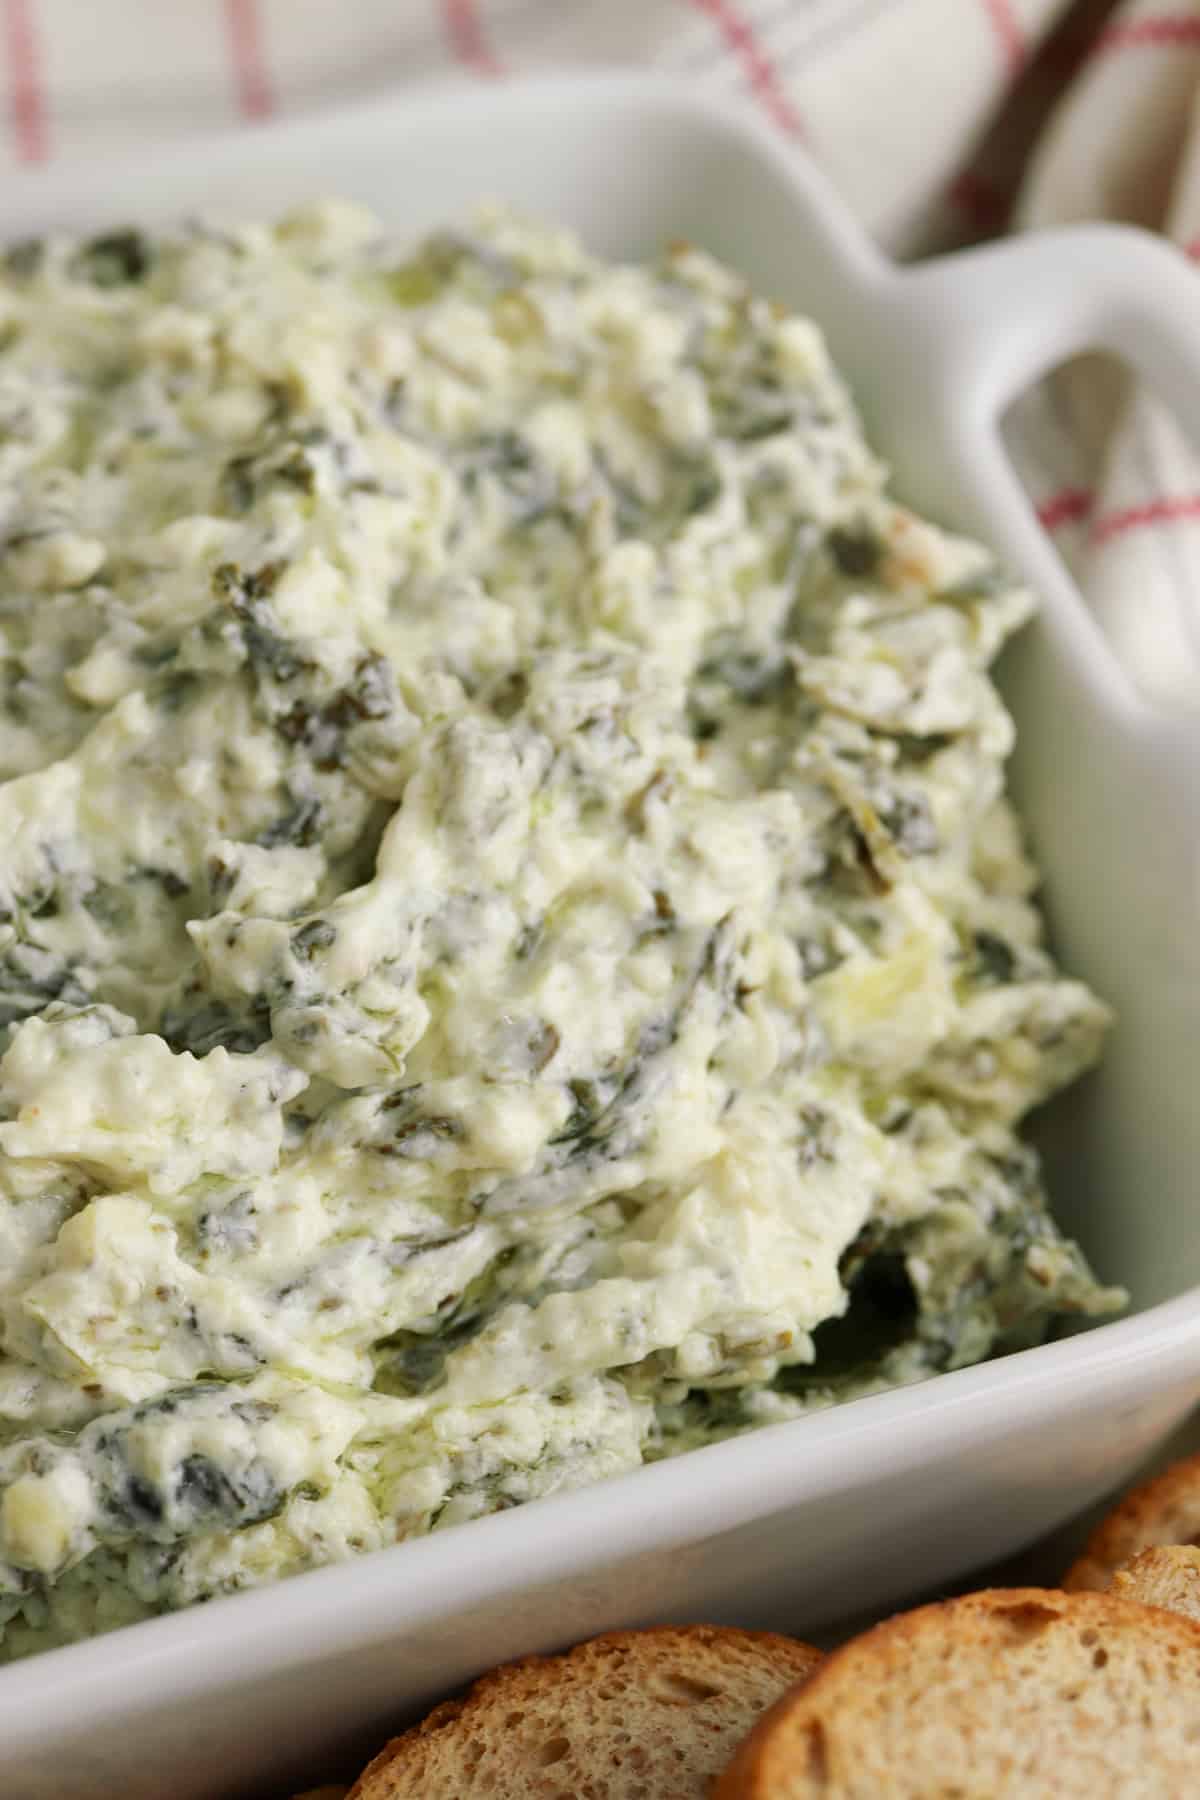 Creamy and cheesy slow cooker spinach artichoke dip in white serving bowl with small pieces of bread for dipping